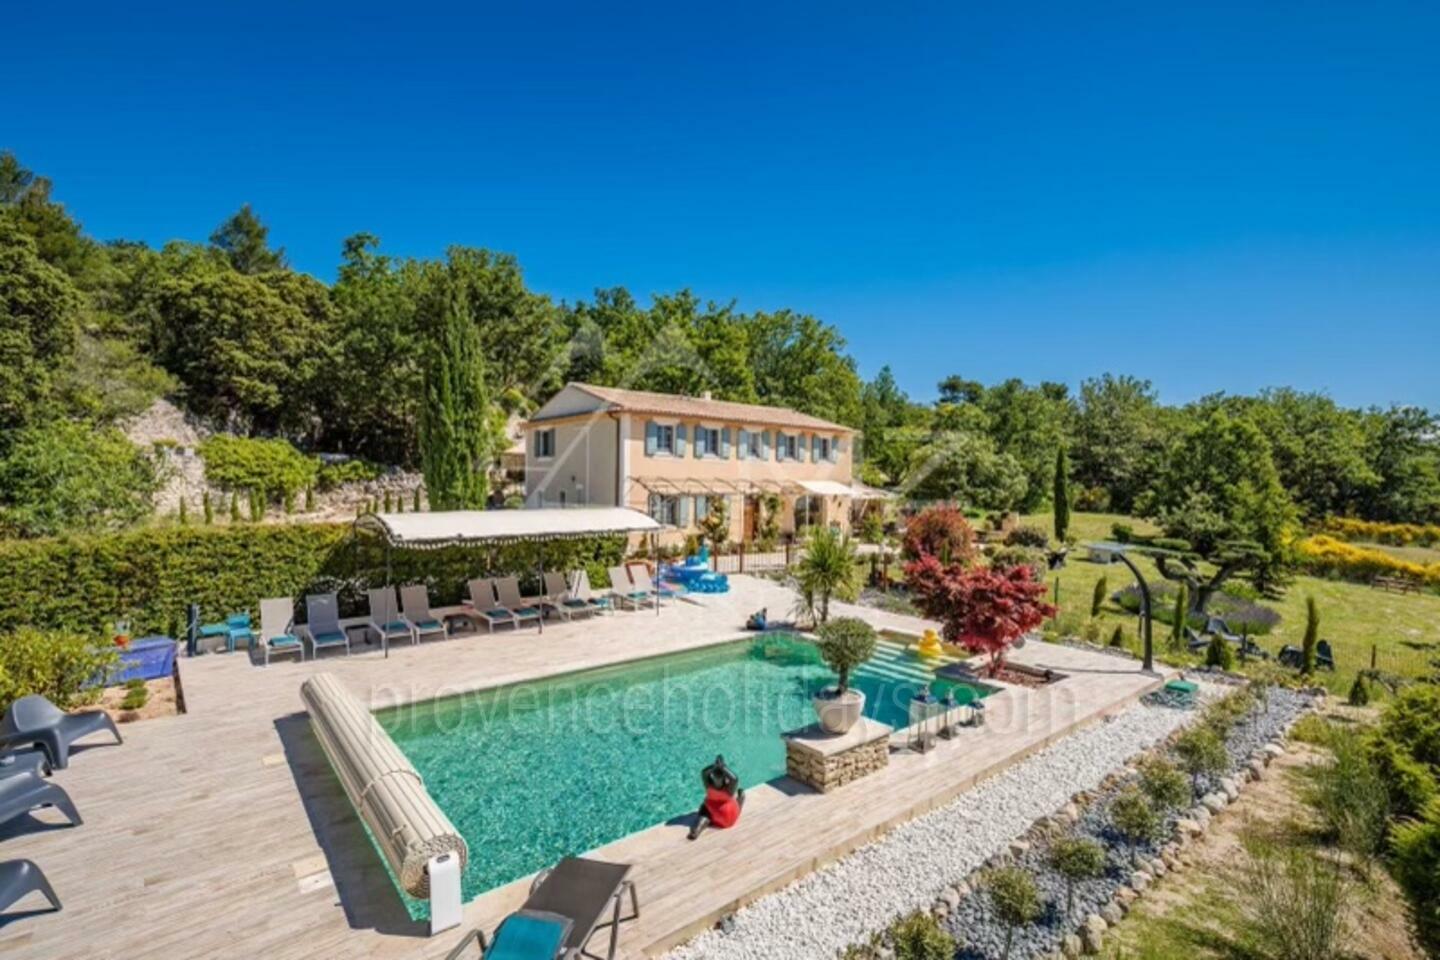 Recently Restored Country House with Heated Pool 1 - Bastide des Chênes: Villa: Pool